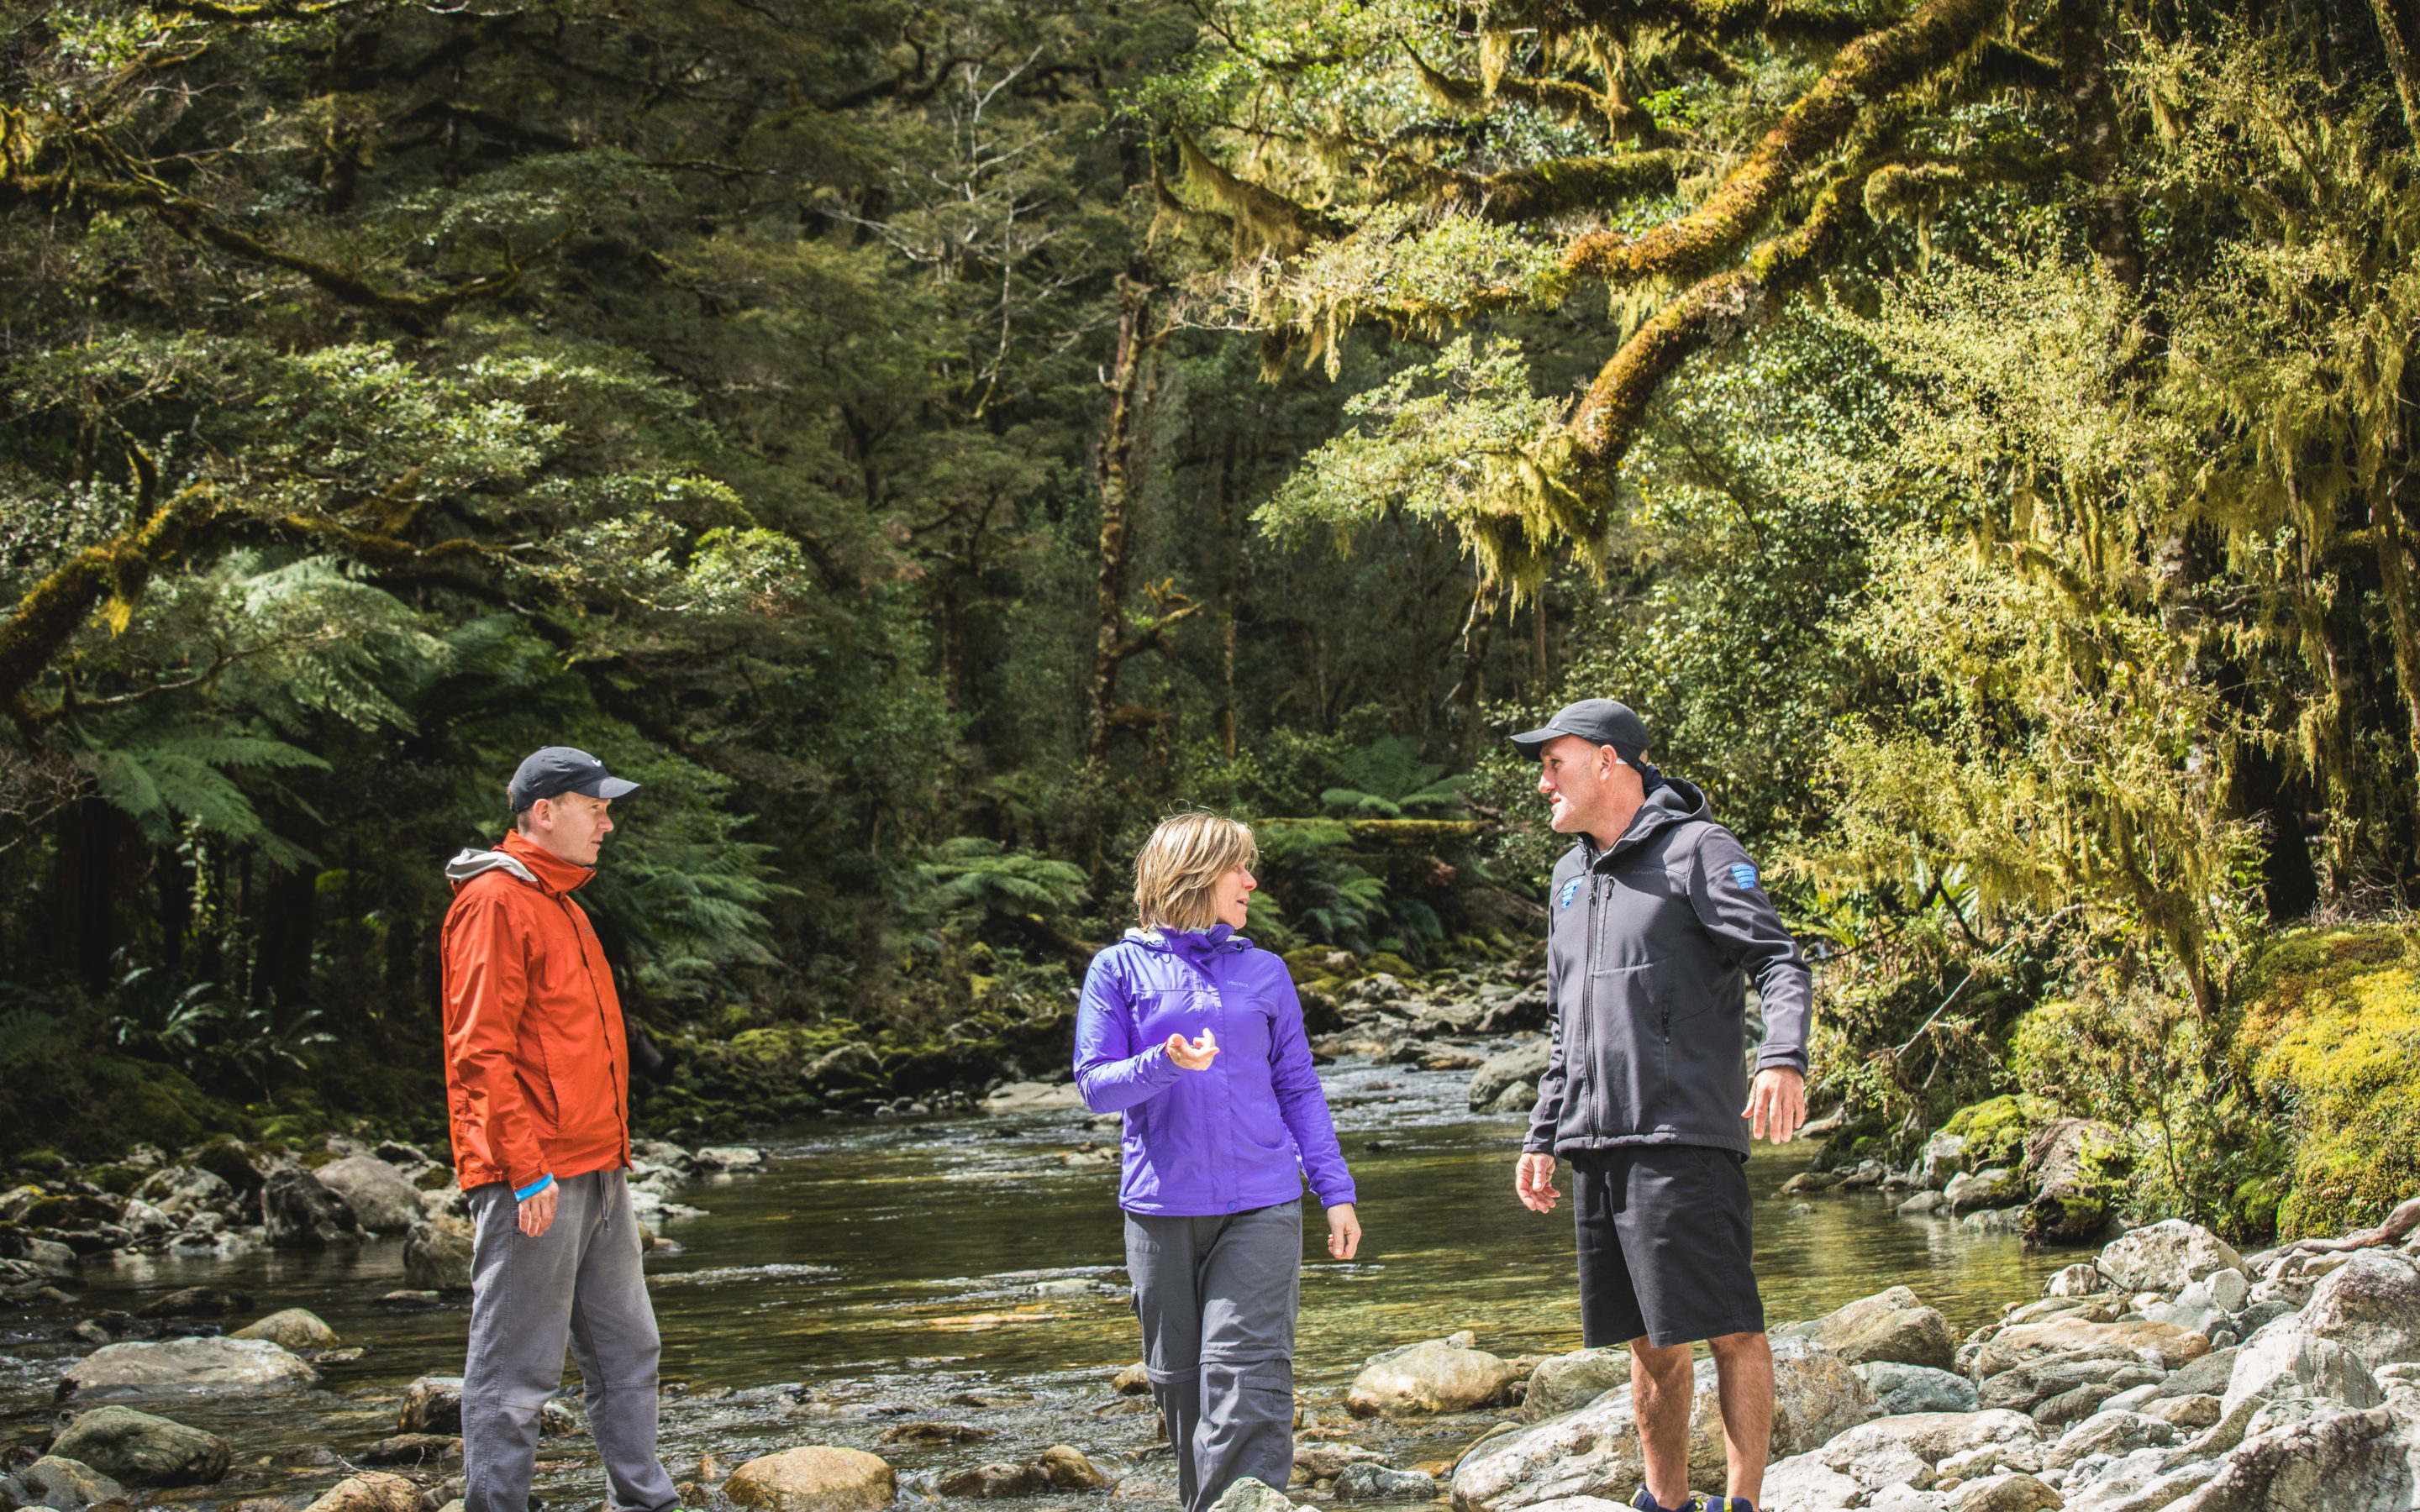 Patron of the forest, Bard Crawford with Fiordland Outdoors Co.